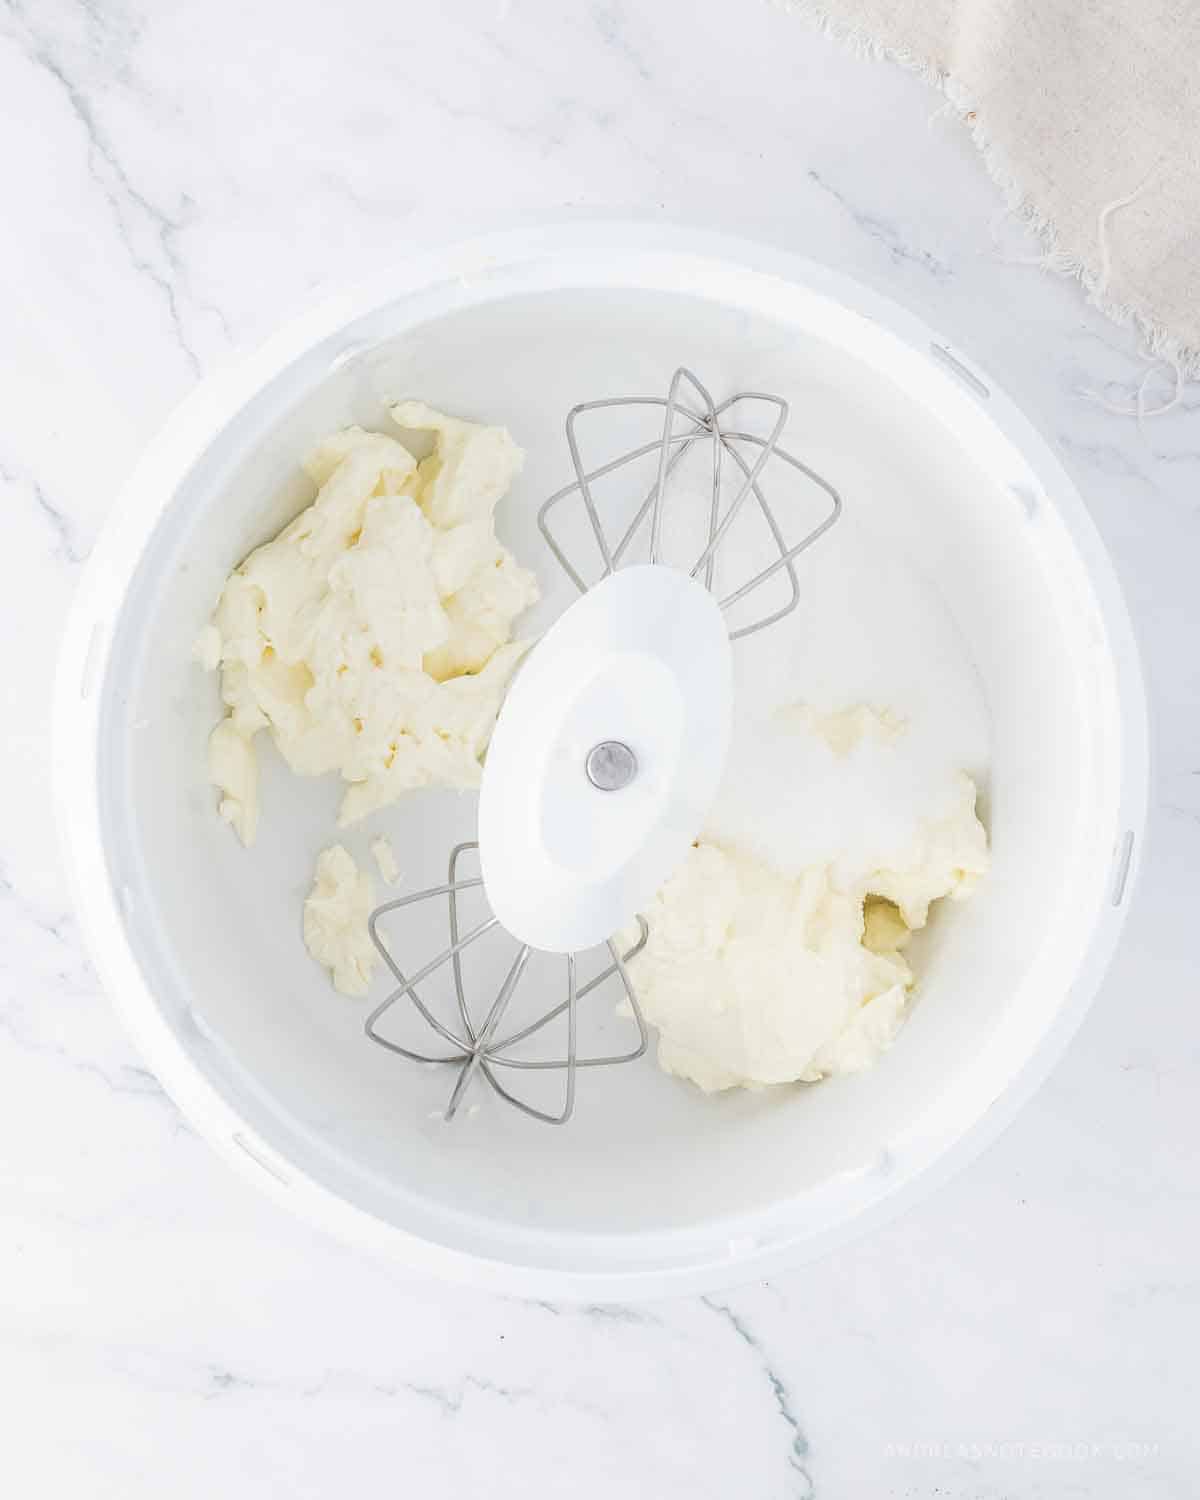 Cream cheese and sugar in a stand mixer bowl.